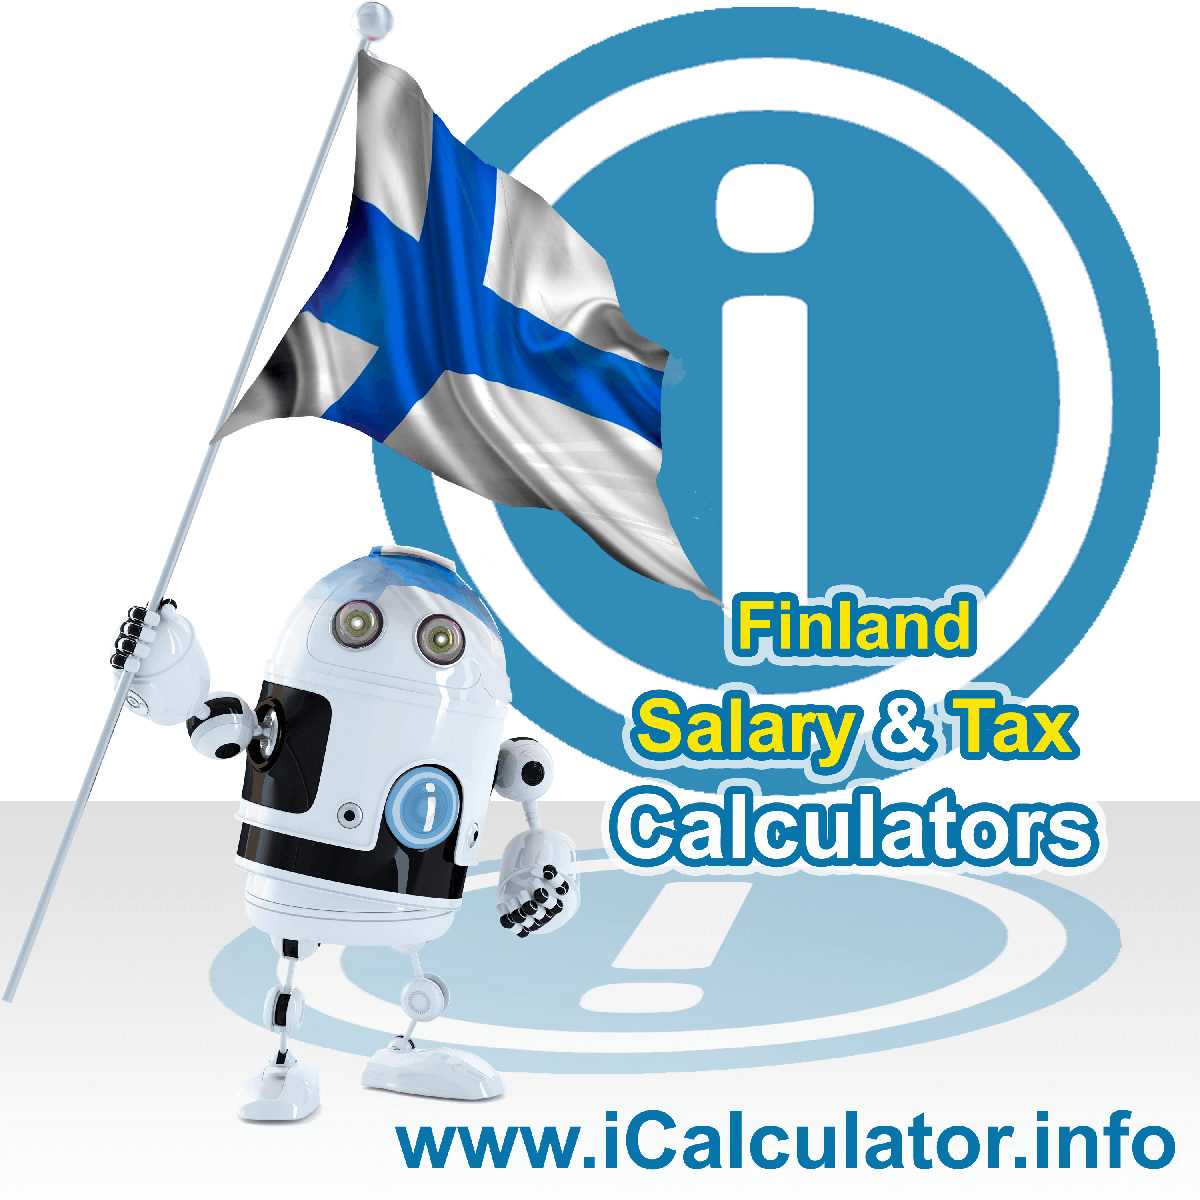 Finland Wage Calculator. This image shows the Finland flag and information relating to the tax formula for the Finland Tax Calculator